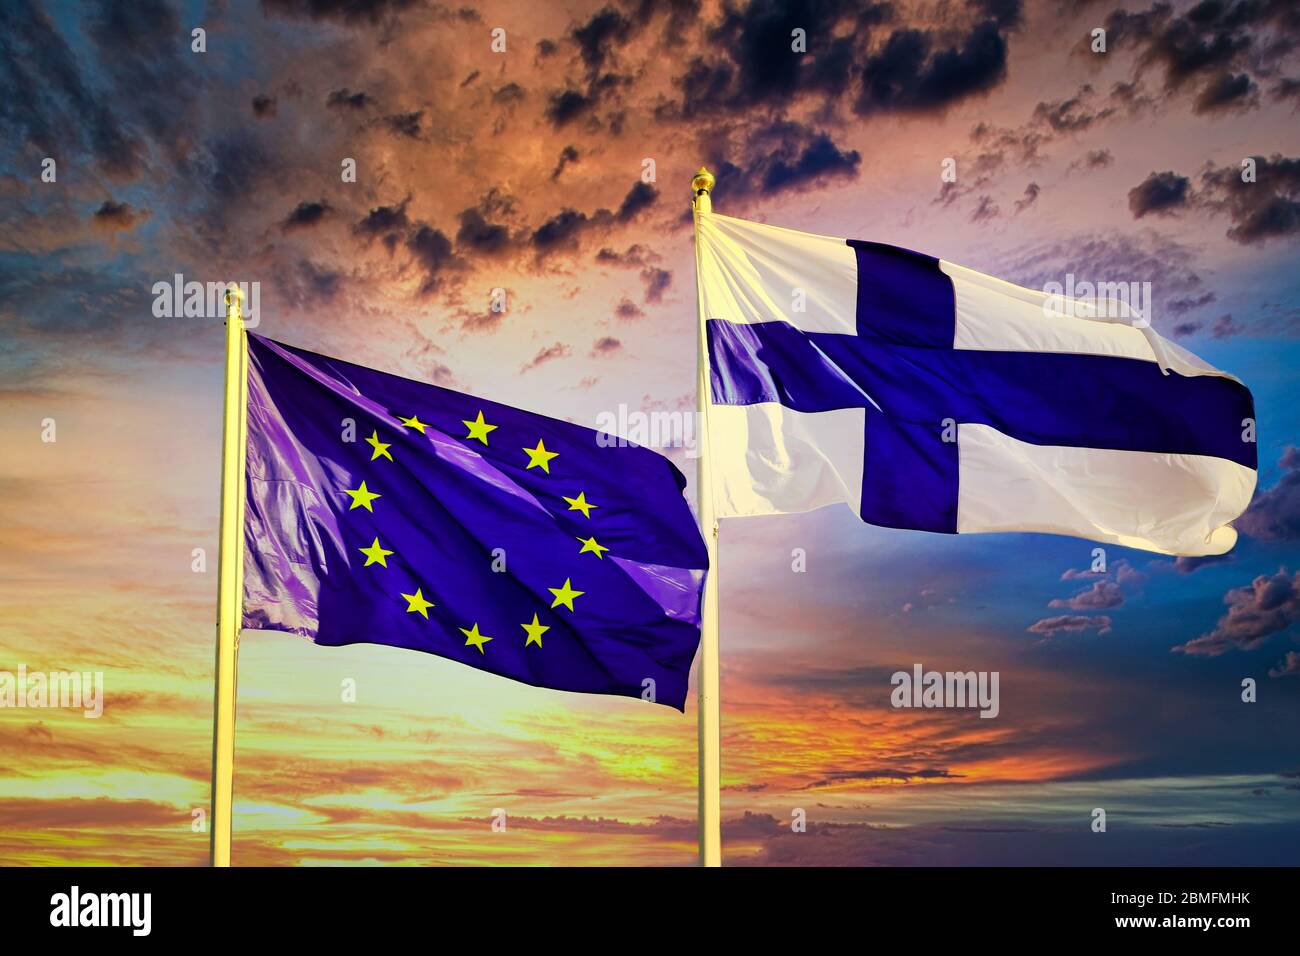 Flags of EU and Finland against colourful, dramatic sunset sky. Stock Photo